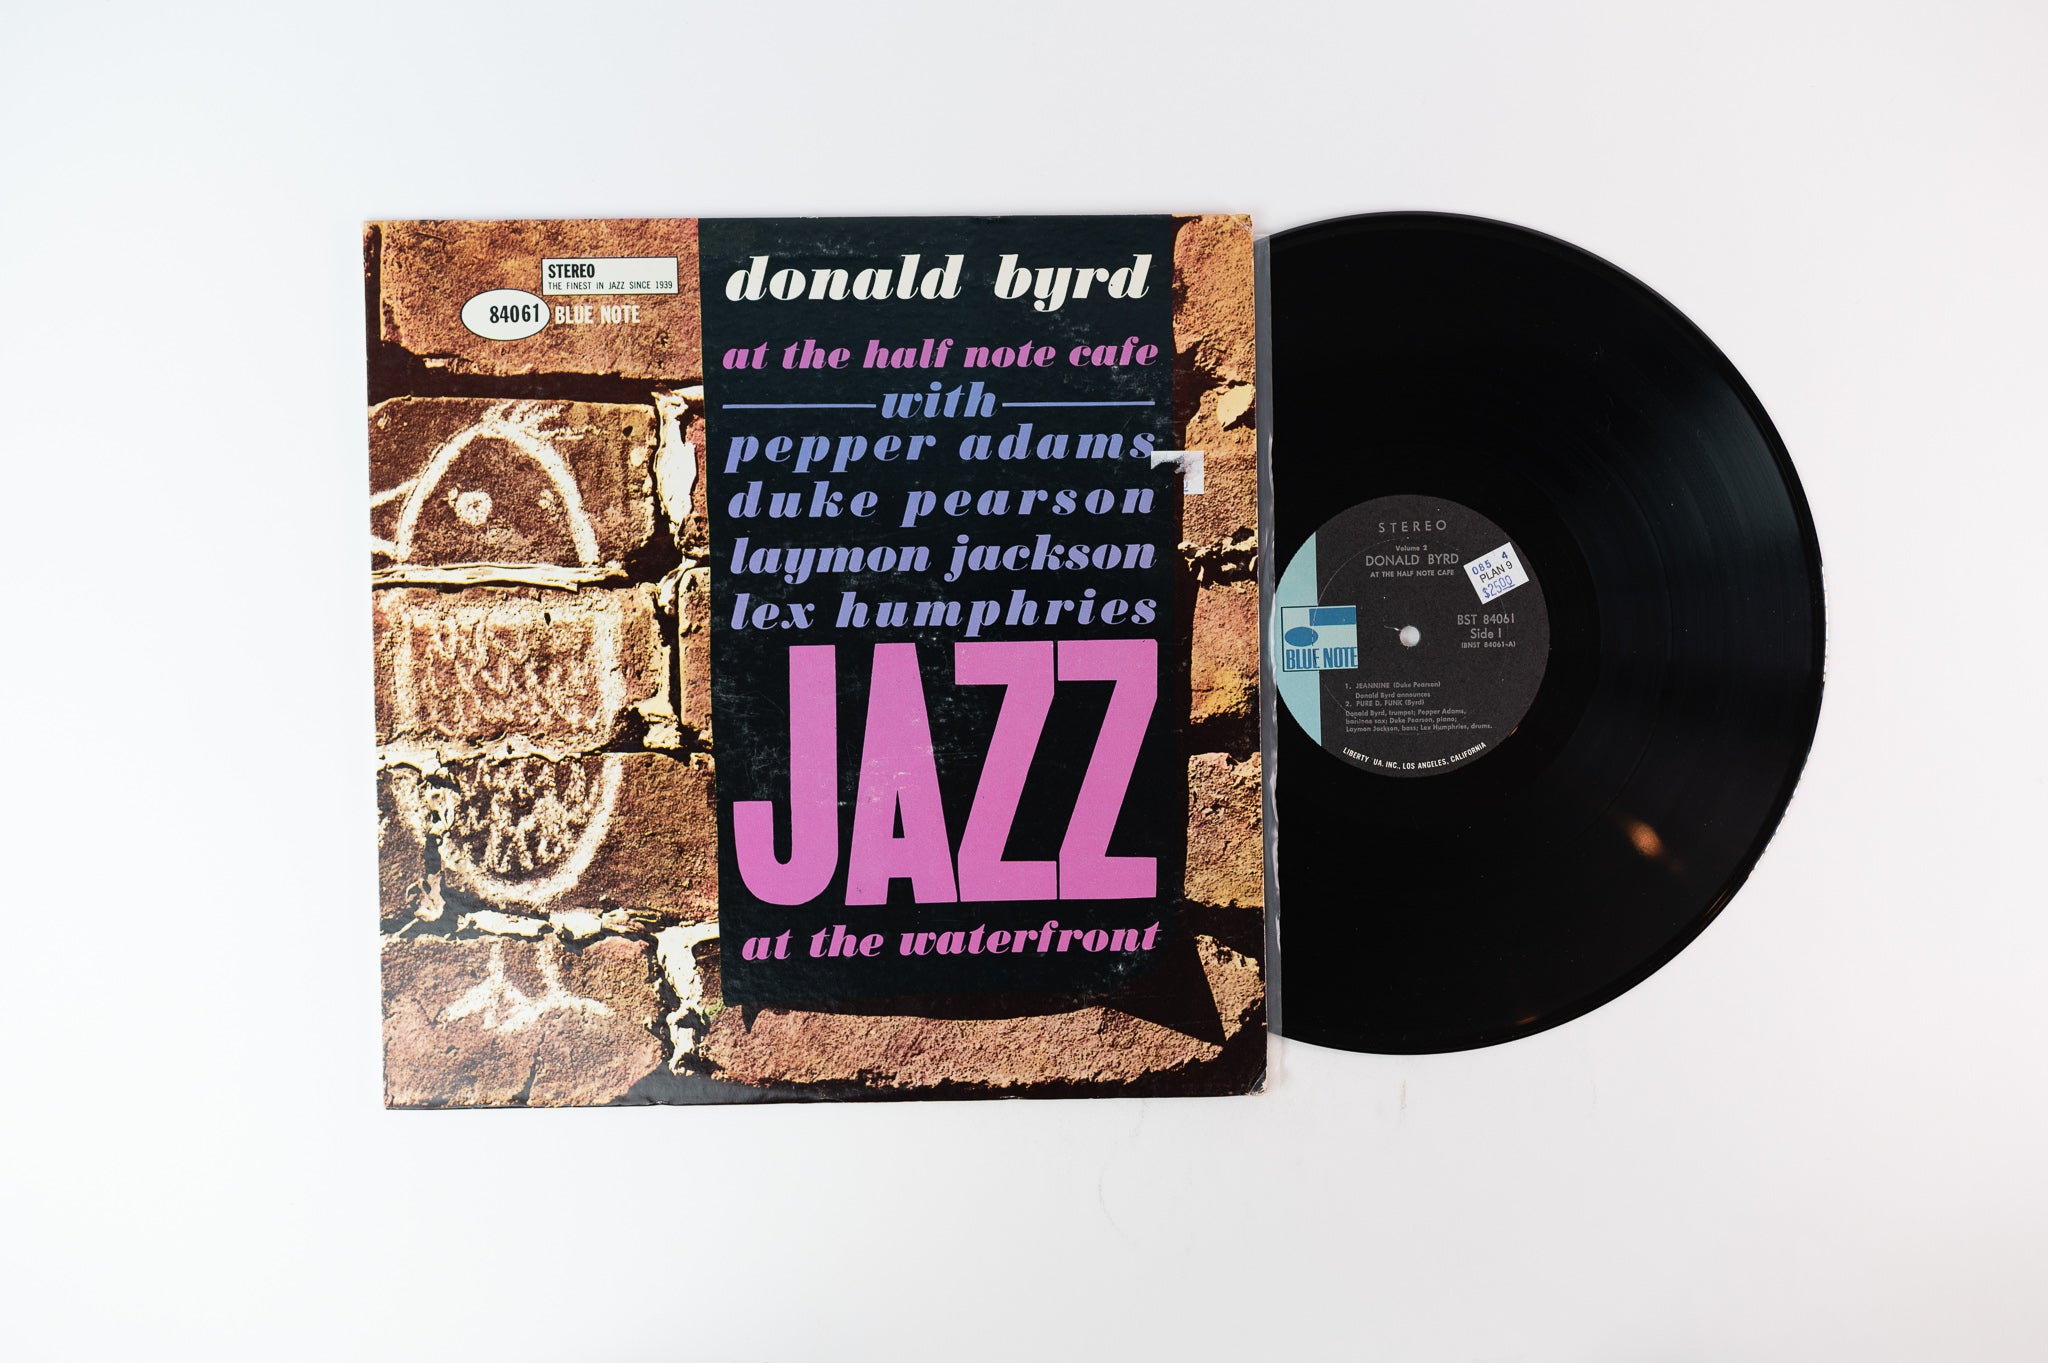 Donald Byrd - At The Half Note Cafe (Volume 2) on Blue Note BST 84061 Aqua and Black Label